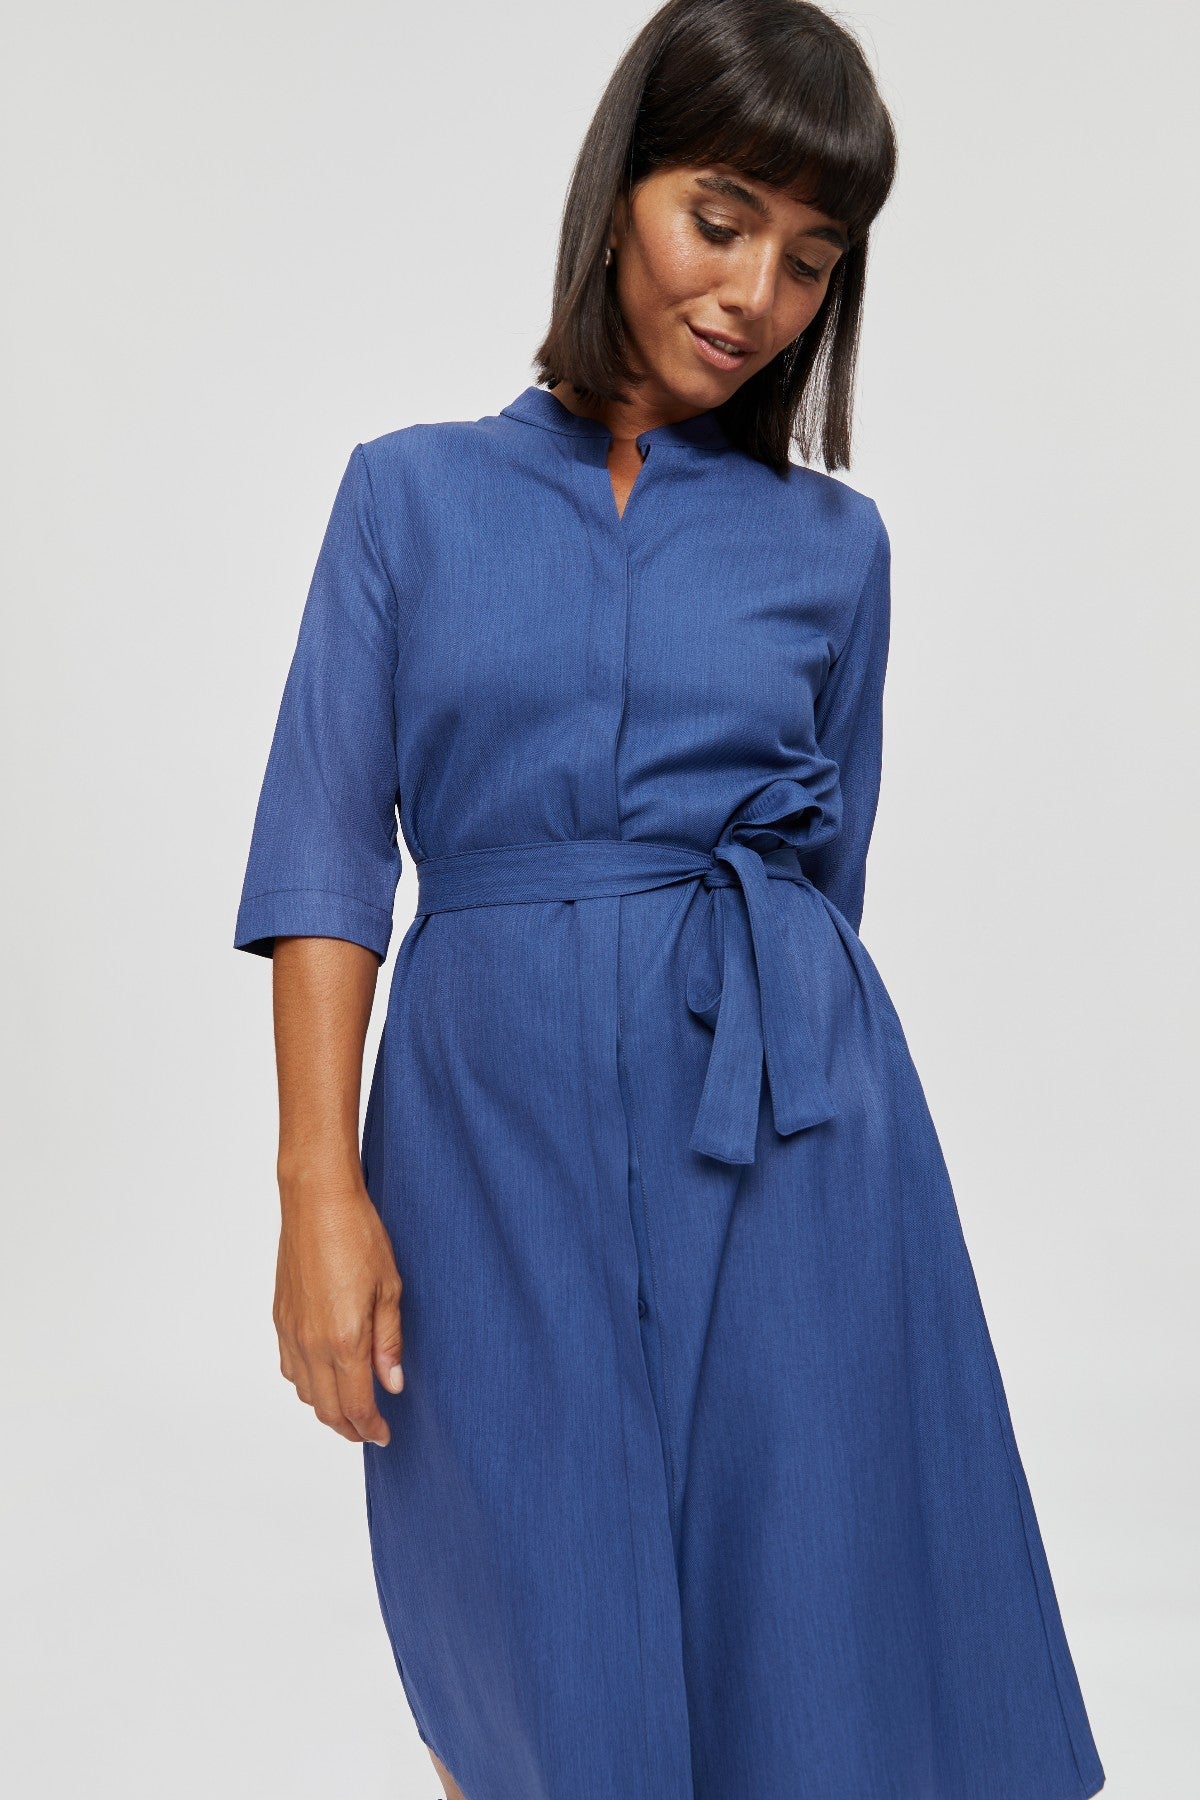 Blue Lidia shirt dress made from recycled polyester by Ayani